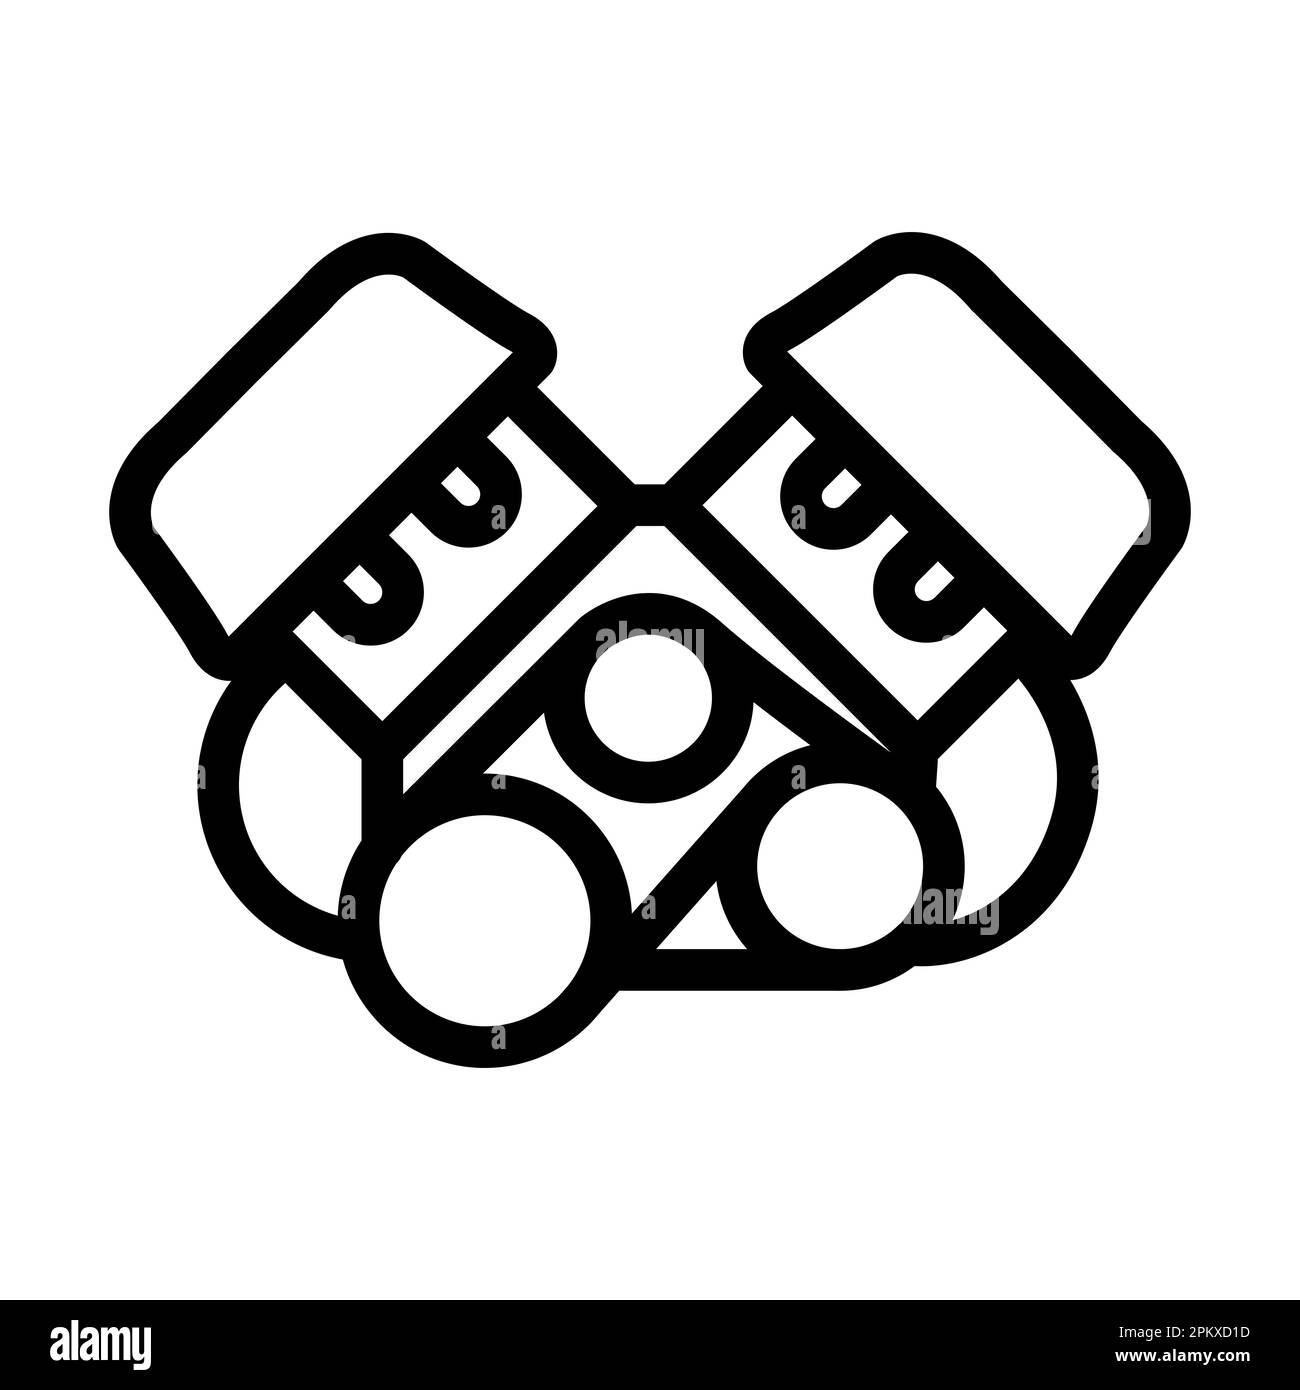 Engine Vector Thick Line Icon For Personal And Commercial Use. Stock Photo